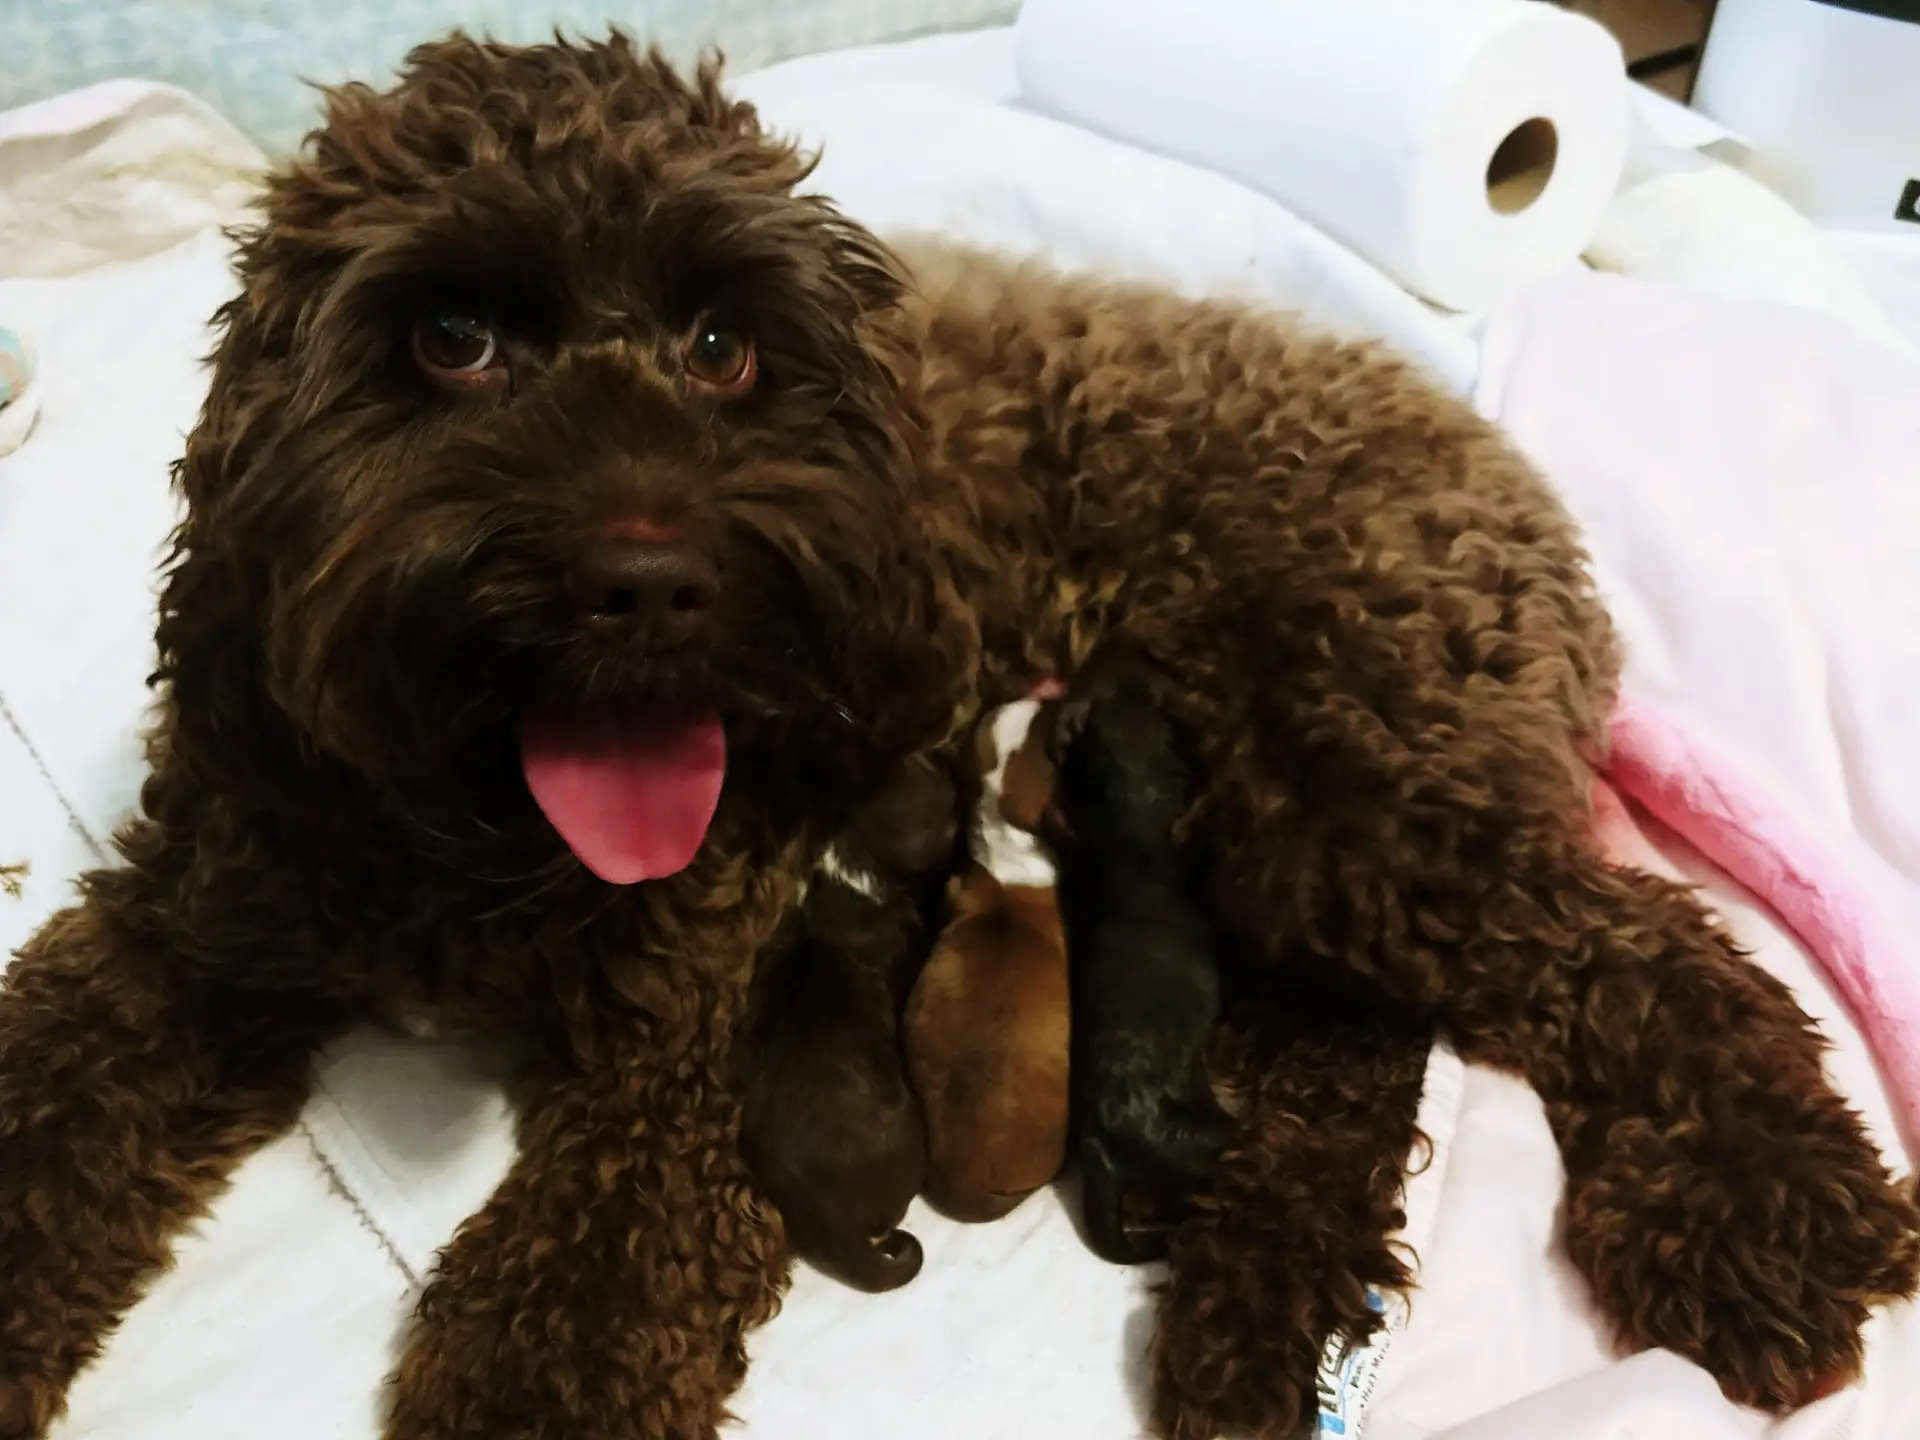 A chocolate labradoodle lying on her side with 3 newborn puppies nursing.